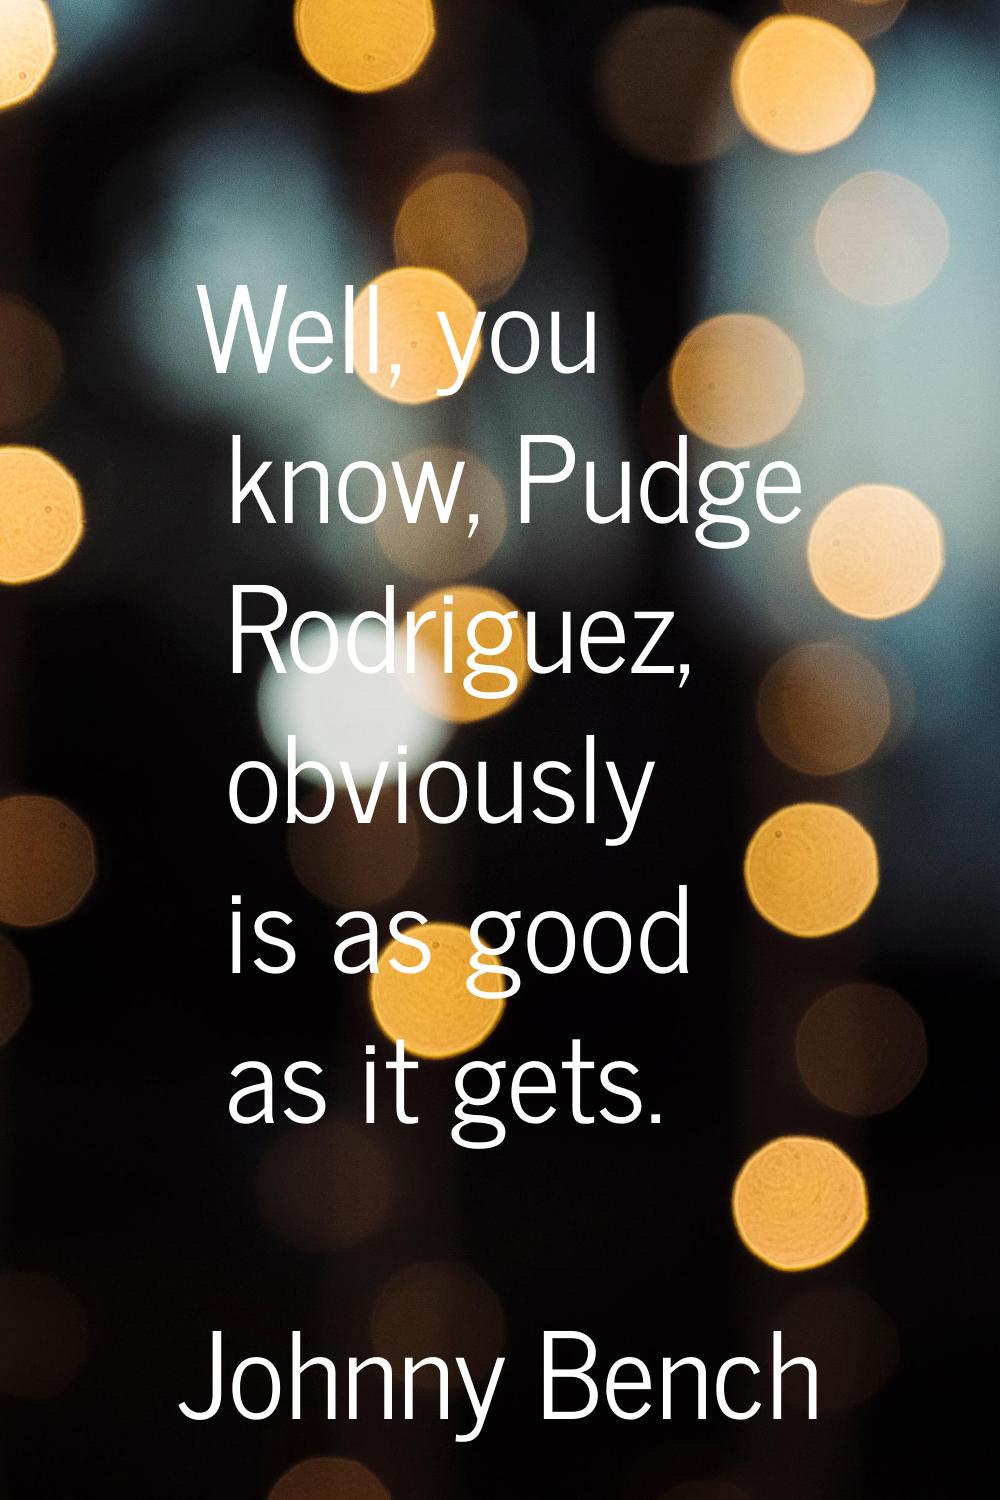 Well, you know, Pudge Rodriguez, obviously is as good as it gets.